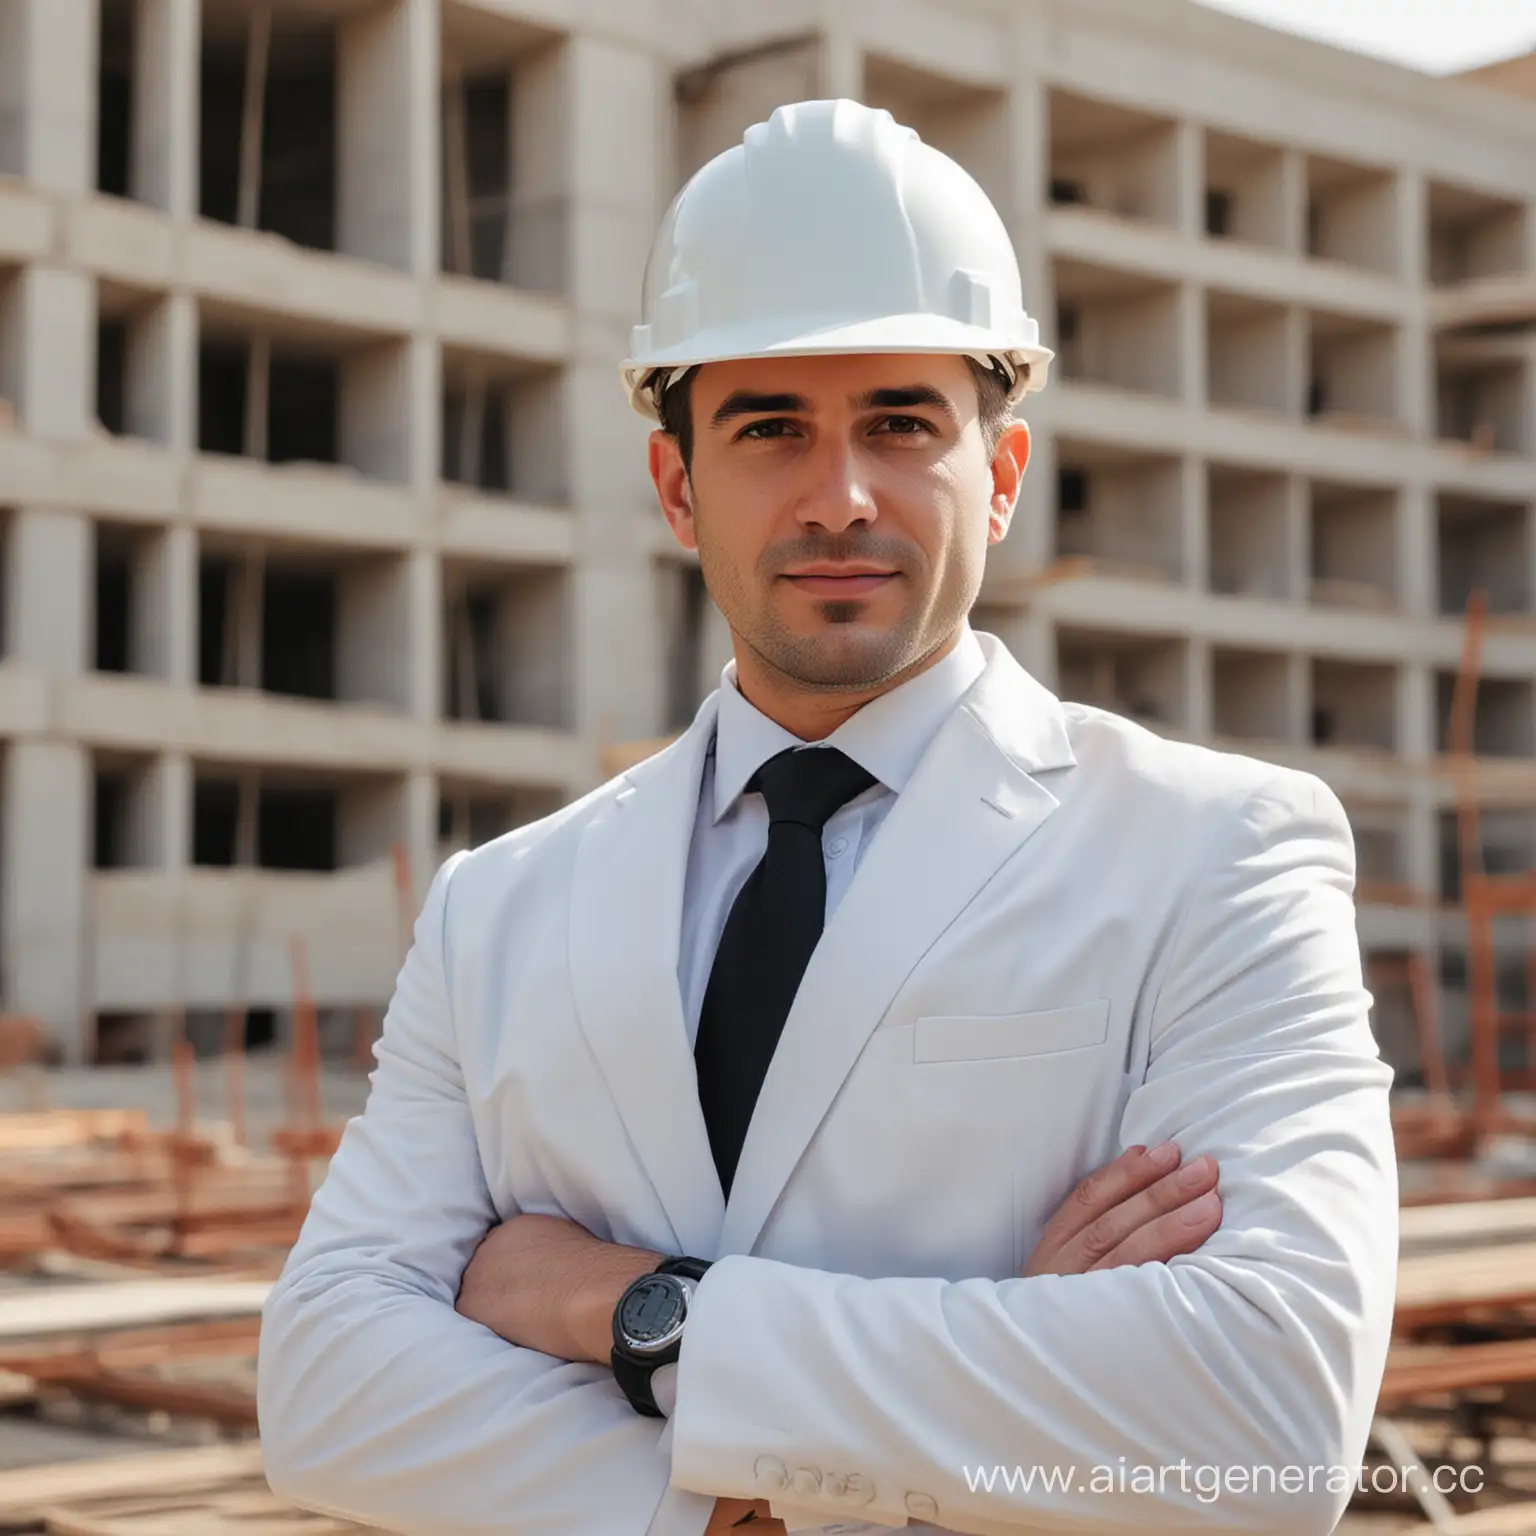 Professional-Construction-Engineer-in-White-Helmet-and-Suit-at-Work